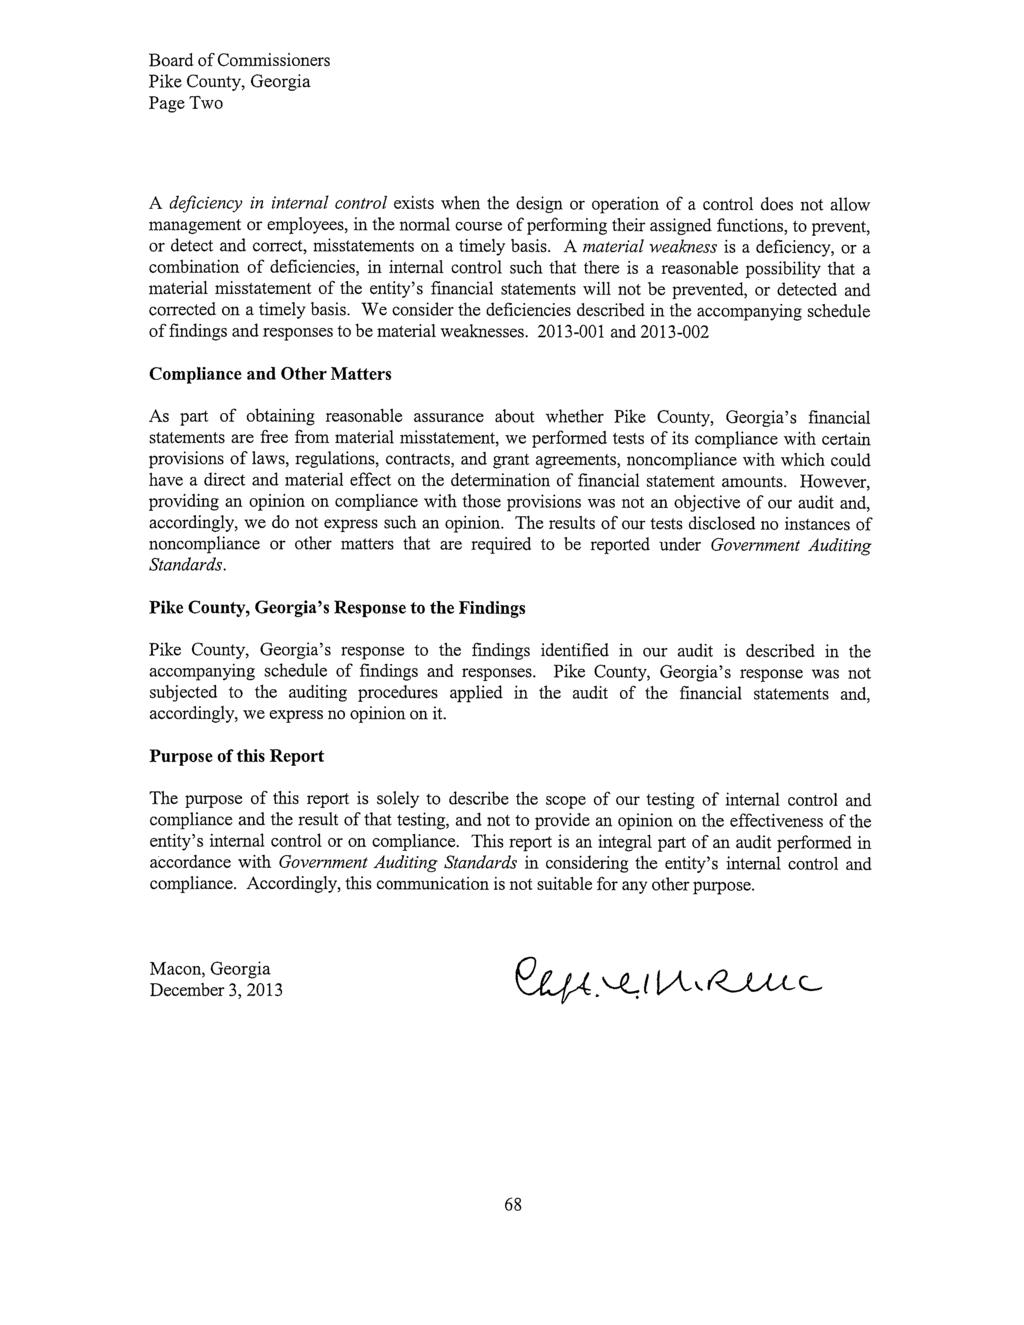 Board of Commissioners Pike County, Georgia Page Two A deficiency in internal control exists when the design or operation of a control does not allow management or employees, in the normal course of